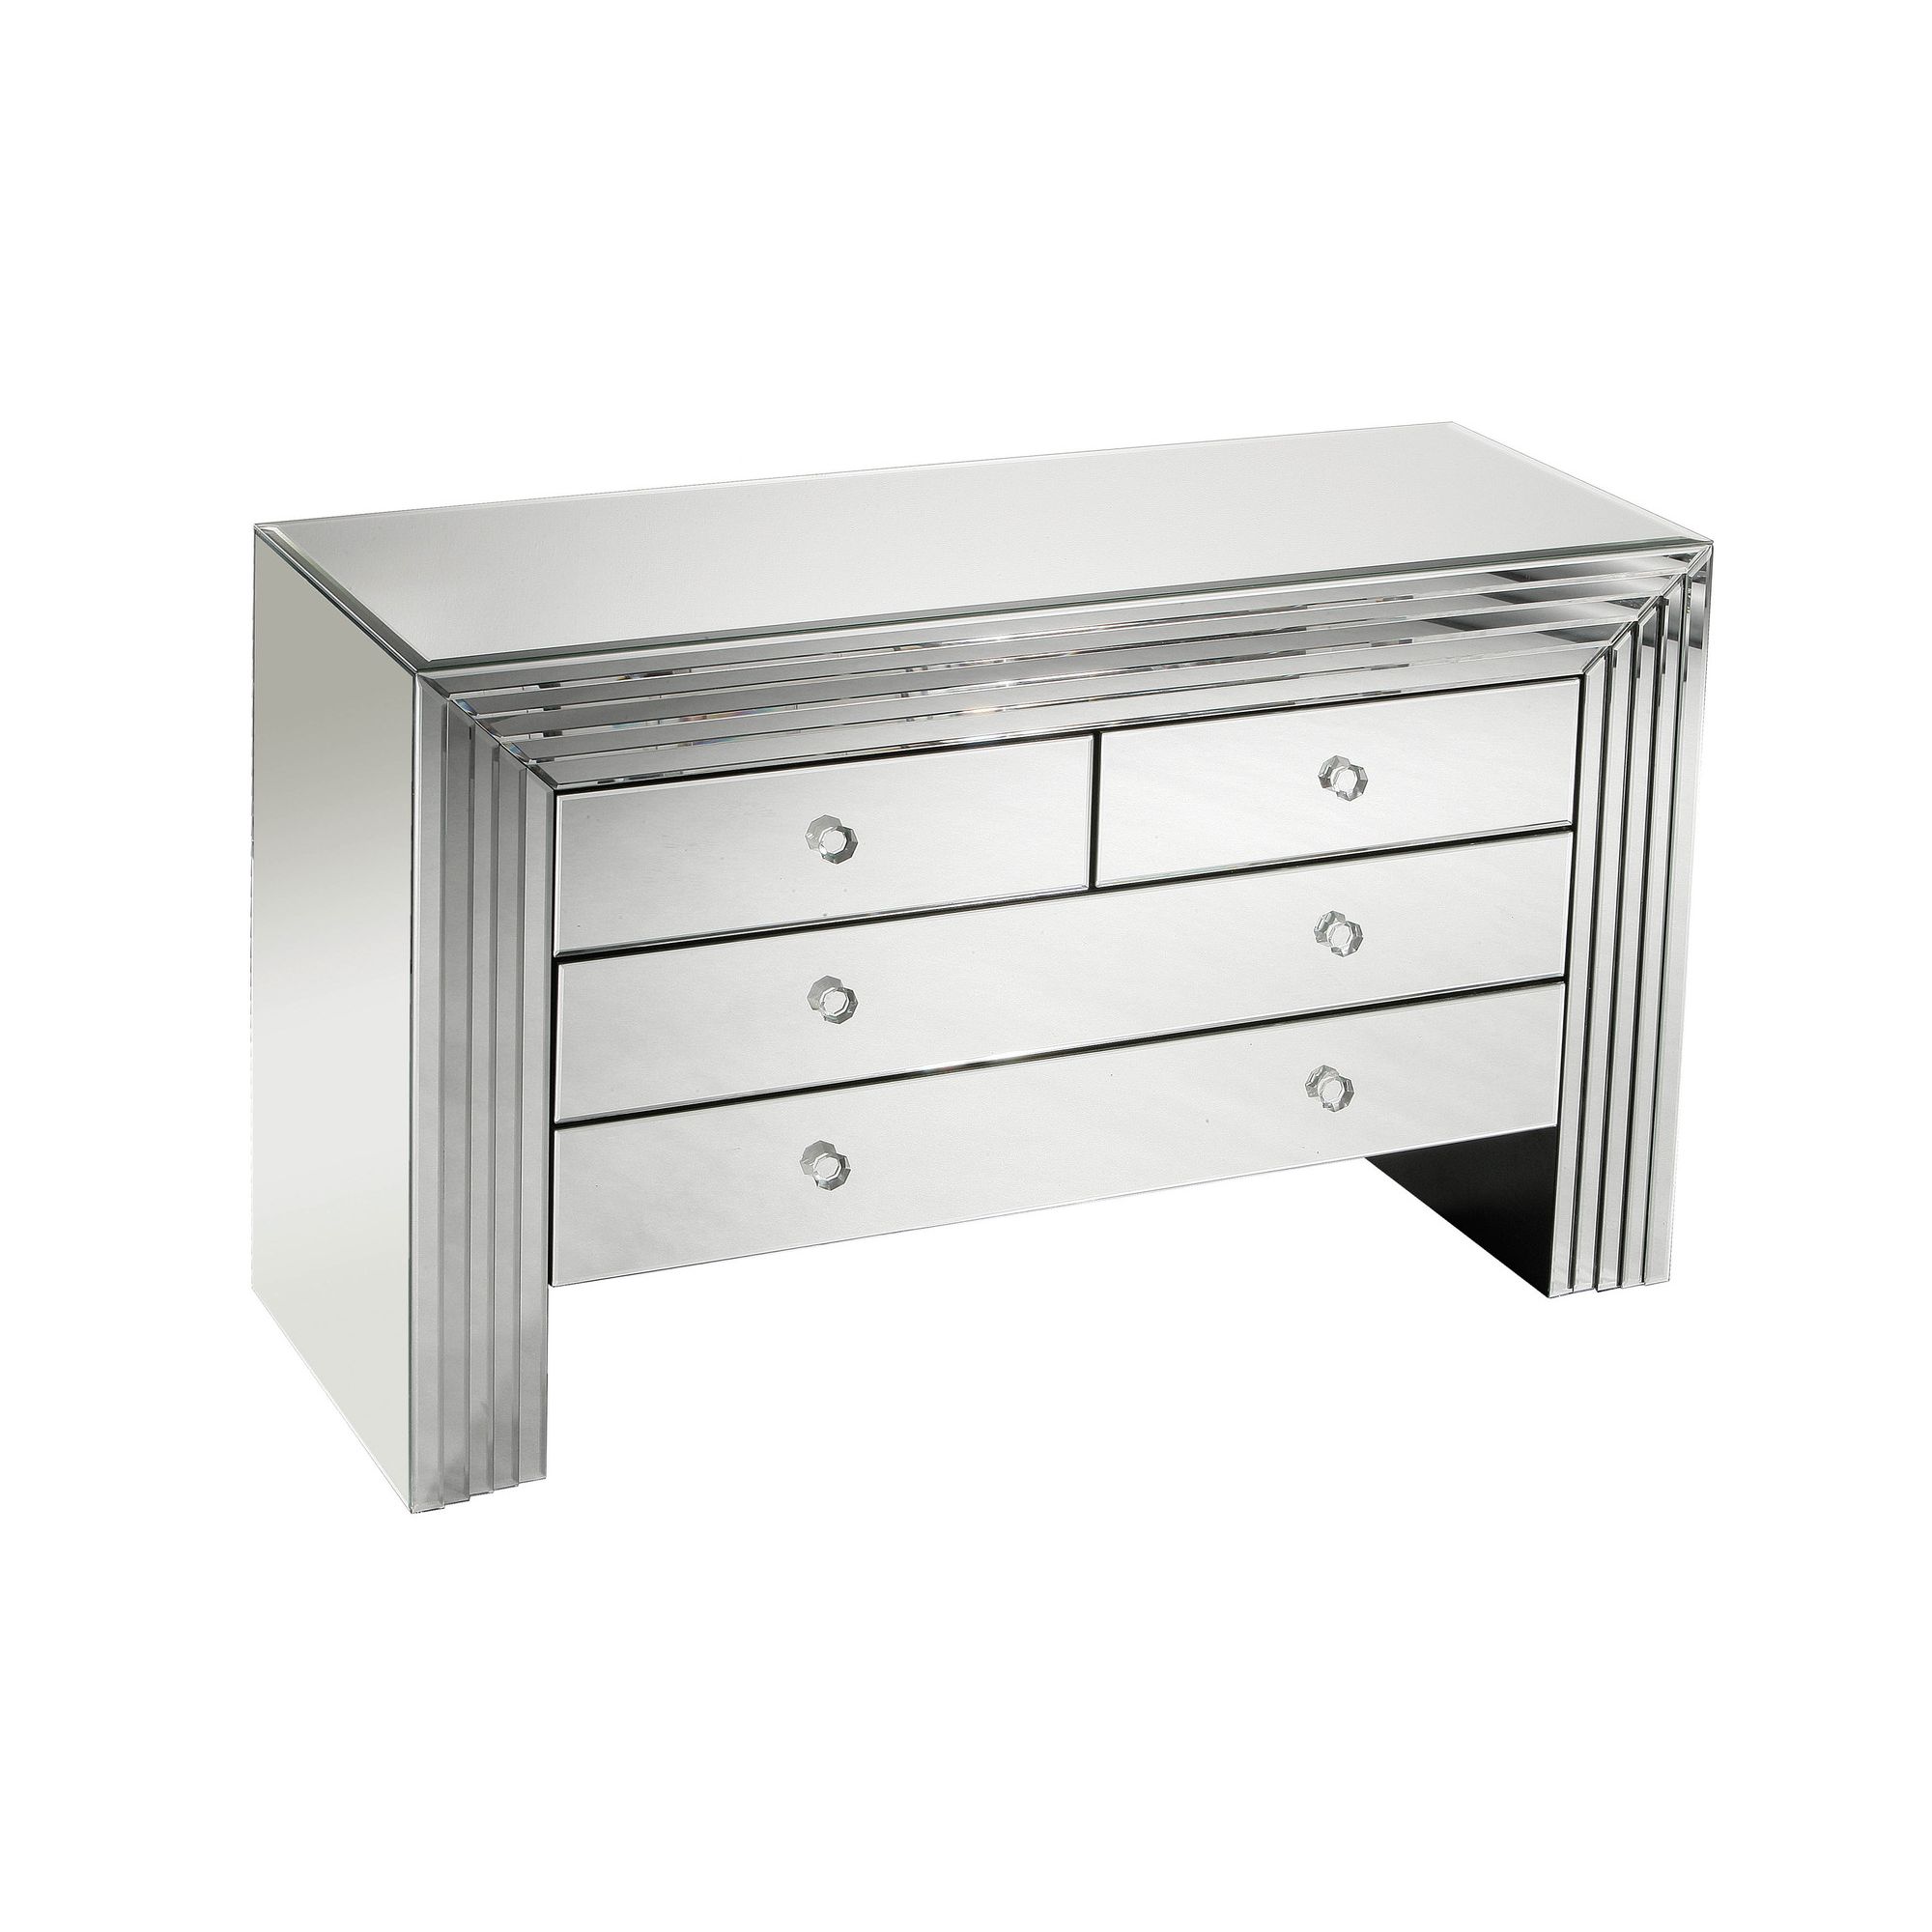 Premier Housewares New Line 4 Drawer Chest at Tesco Direct